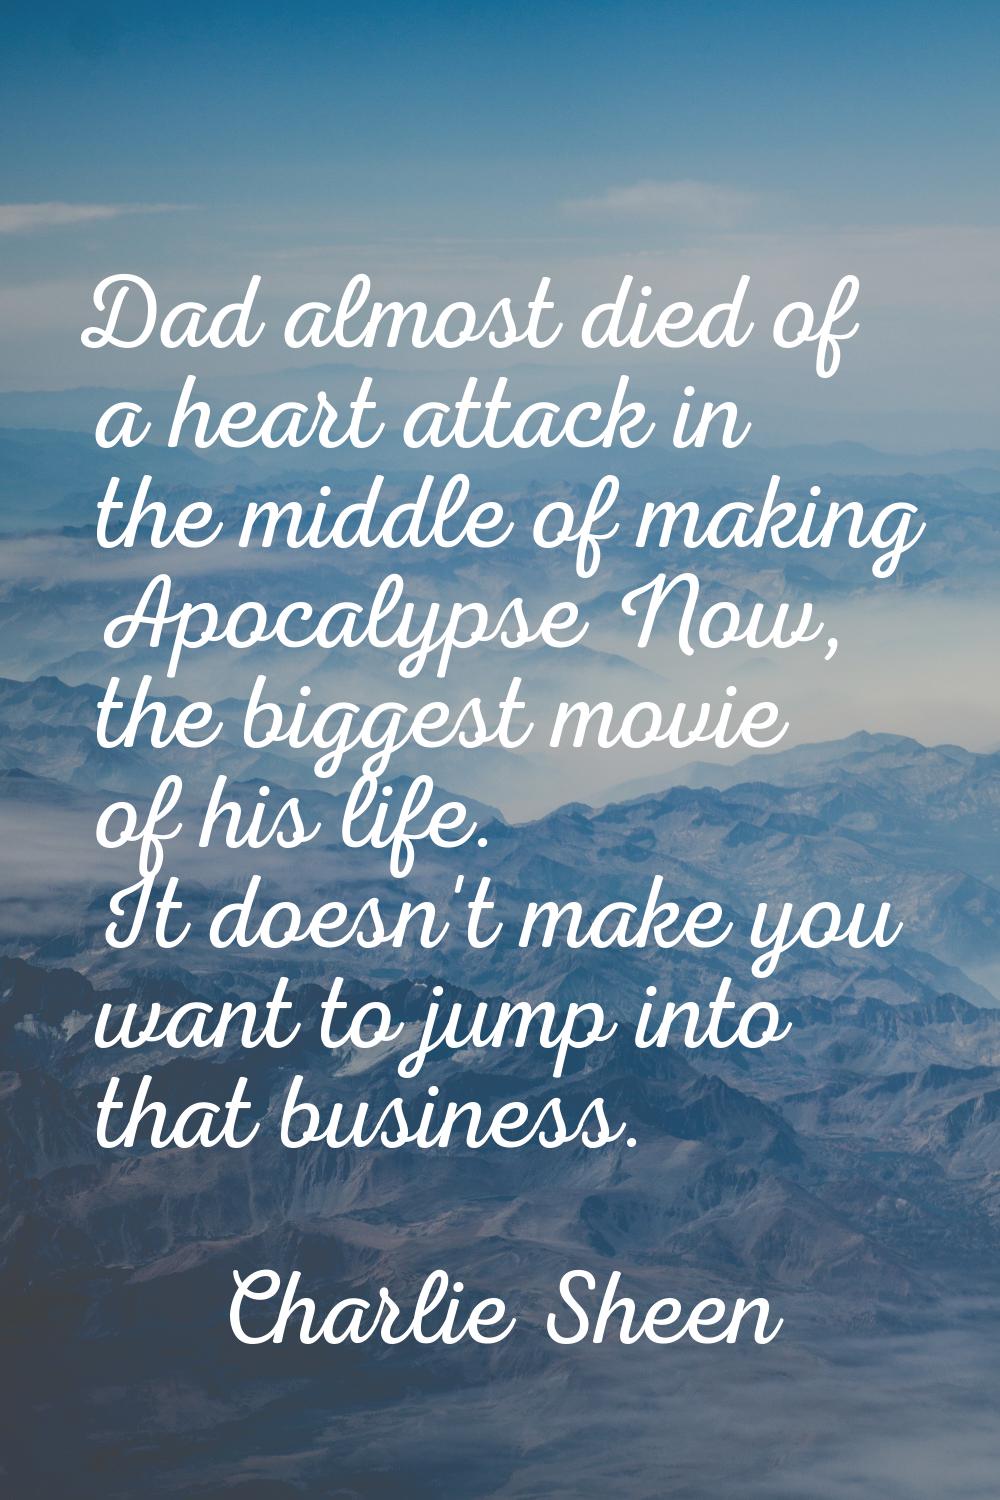 Dad almost died of a heart attack in the middle of making Apocalypse Now, the biggest movie of his 